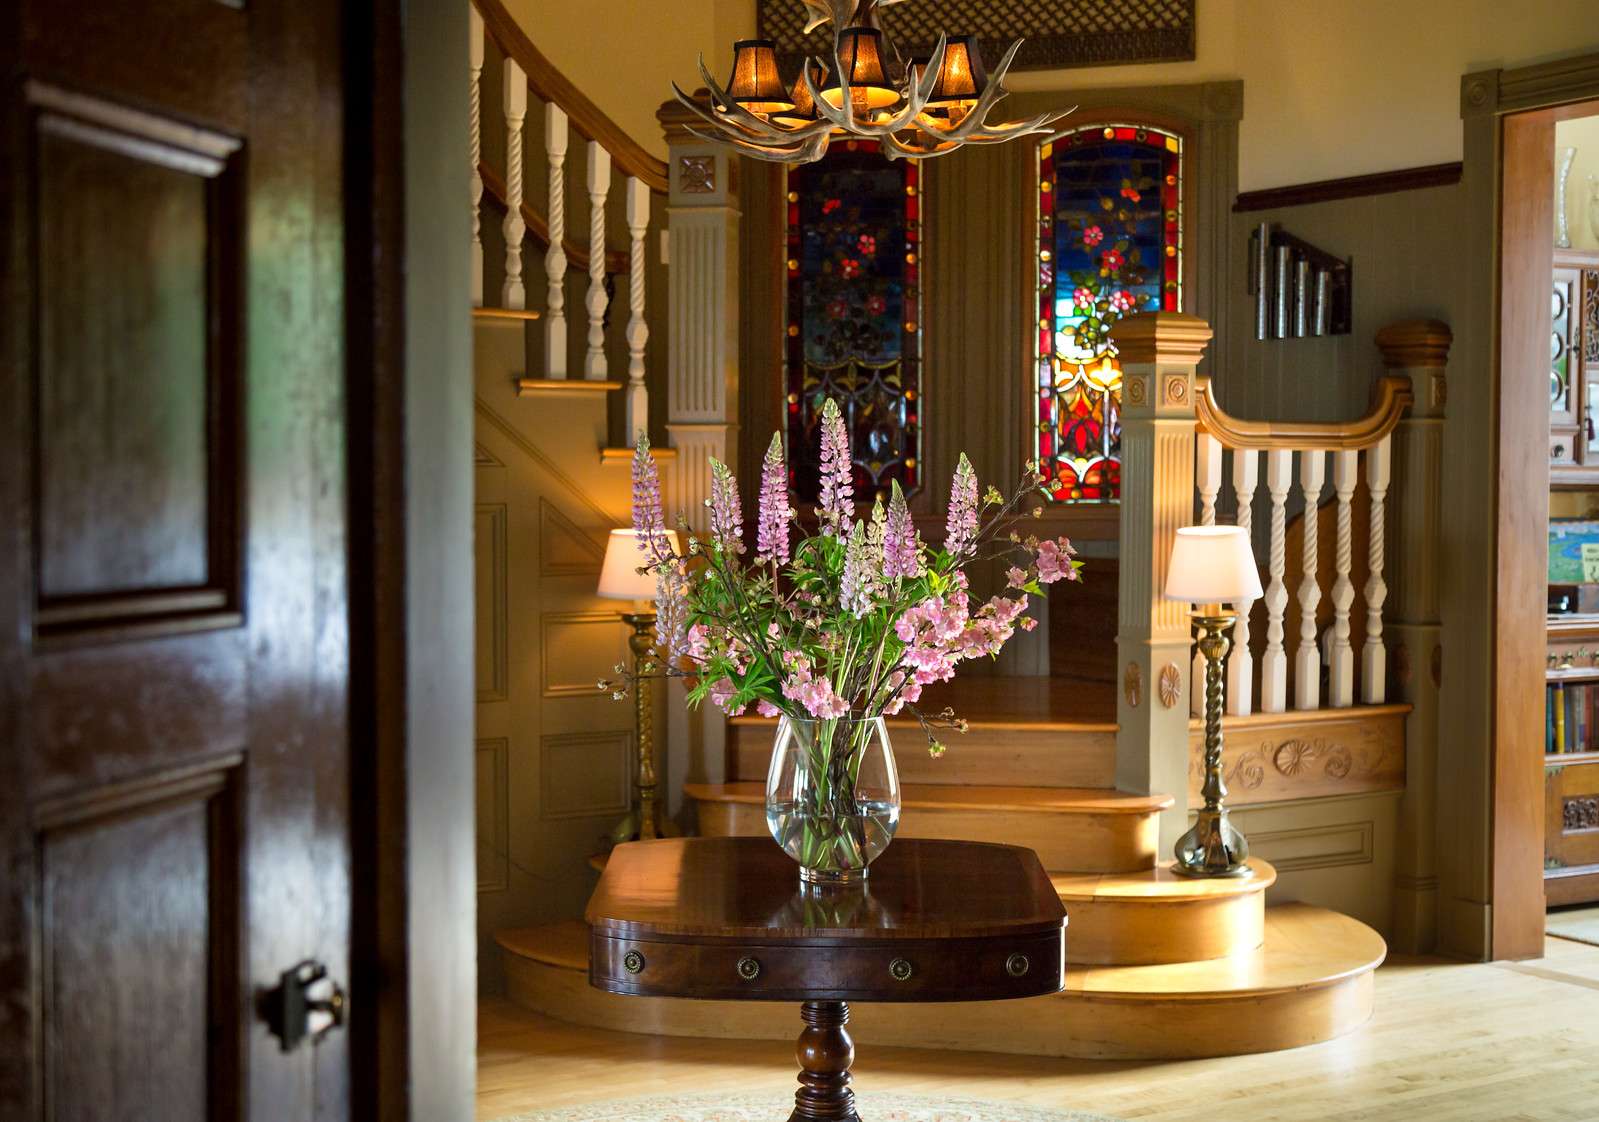 entry with stained glass windows and flowers